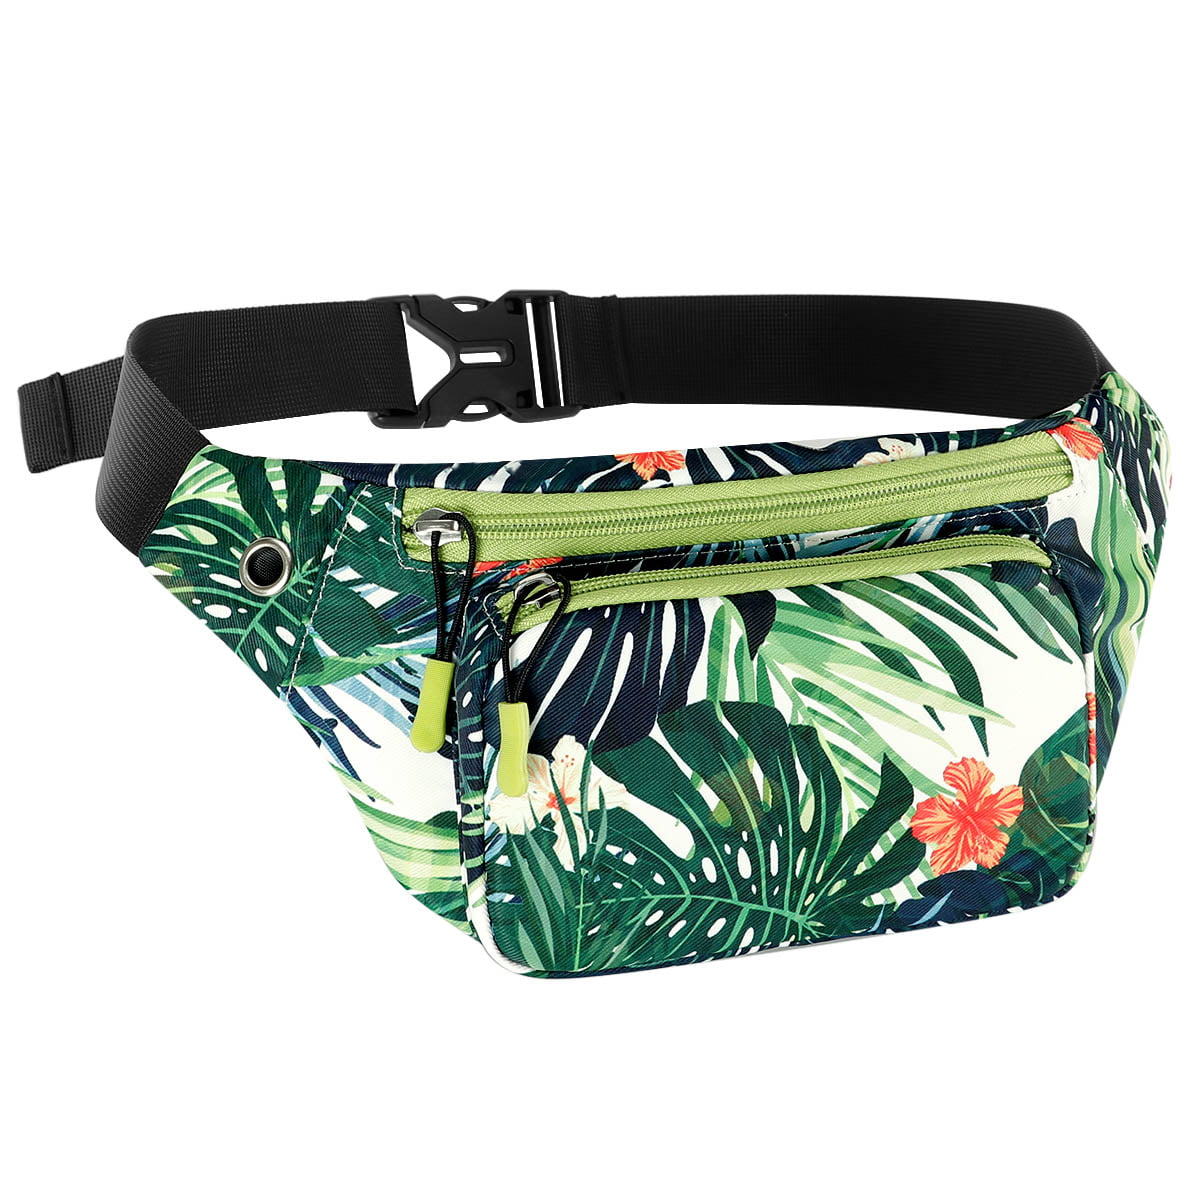 Fanny Pack Waist Bag Sling Backpack Water Resistant Durable Polyester Small Outdoor Lightweight 